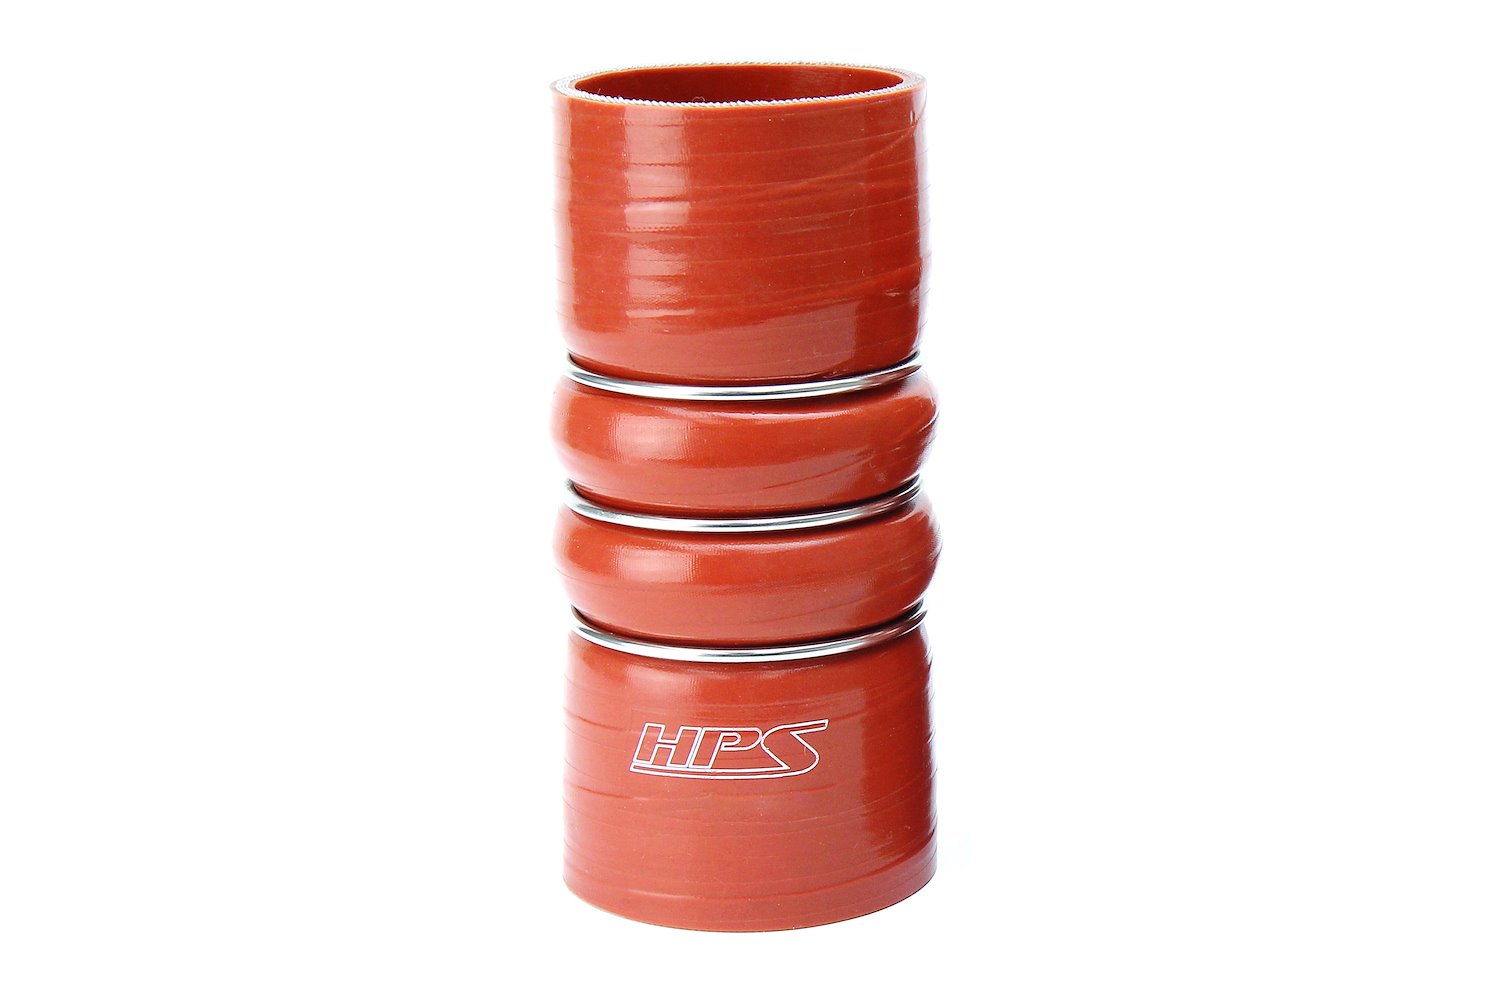 CAC-350-HOT Silicone CAC Hose, Silicone CAC Hump Hose Hot, High-Temp 4-Ply Aramid Reinforced, 3-1/2 in. ID, 6 in. Long